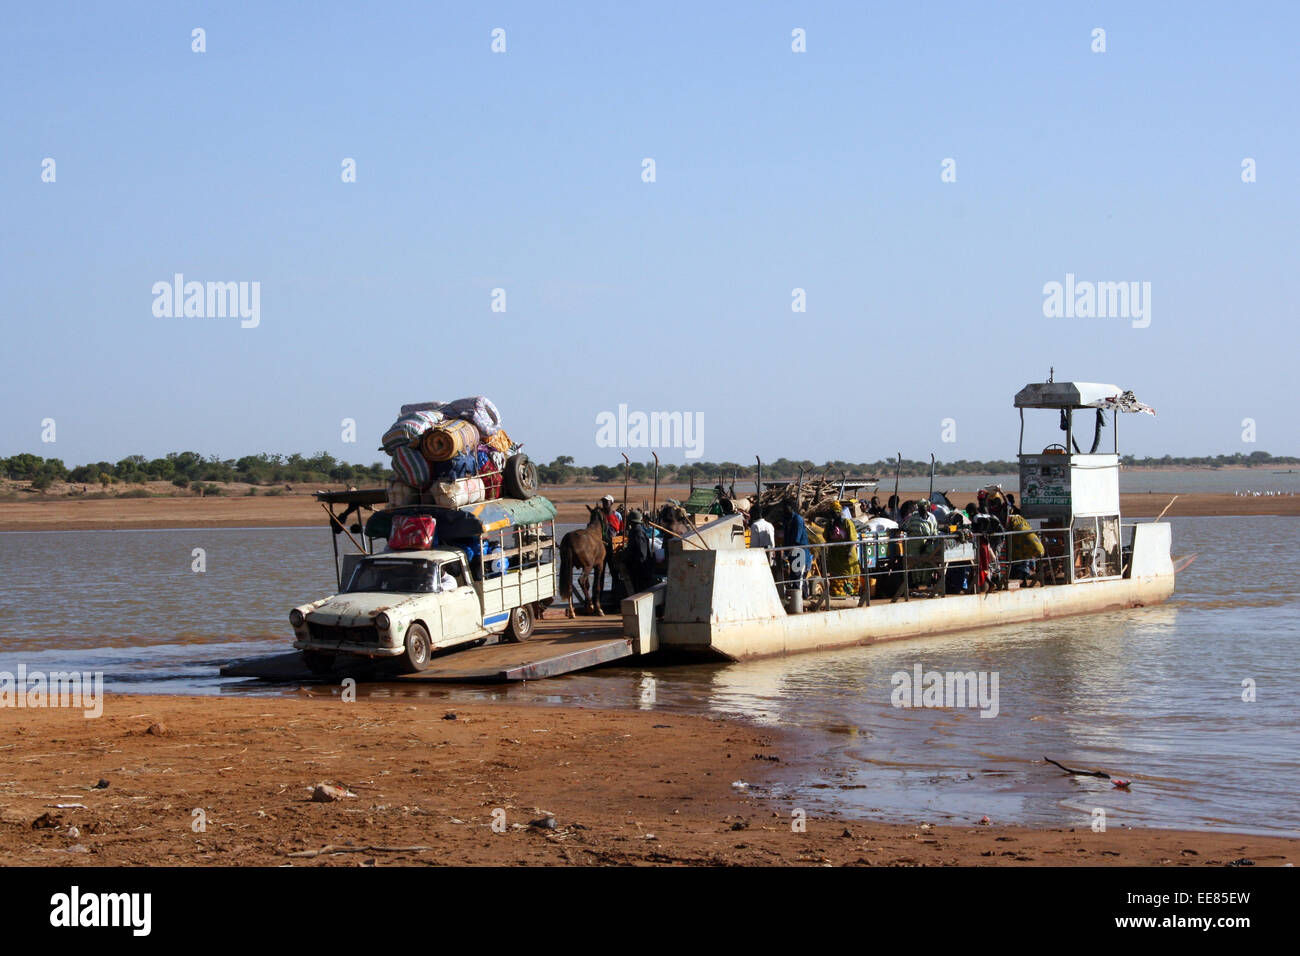 A heavily-loaded truck drives off the ferry crossing the River Bani near Djenne, Mali Stock Photo